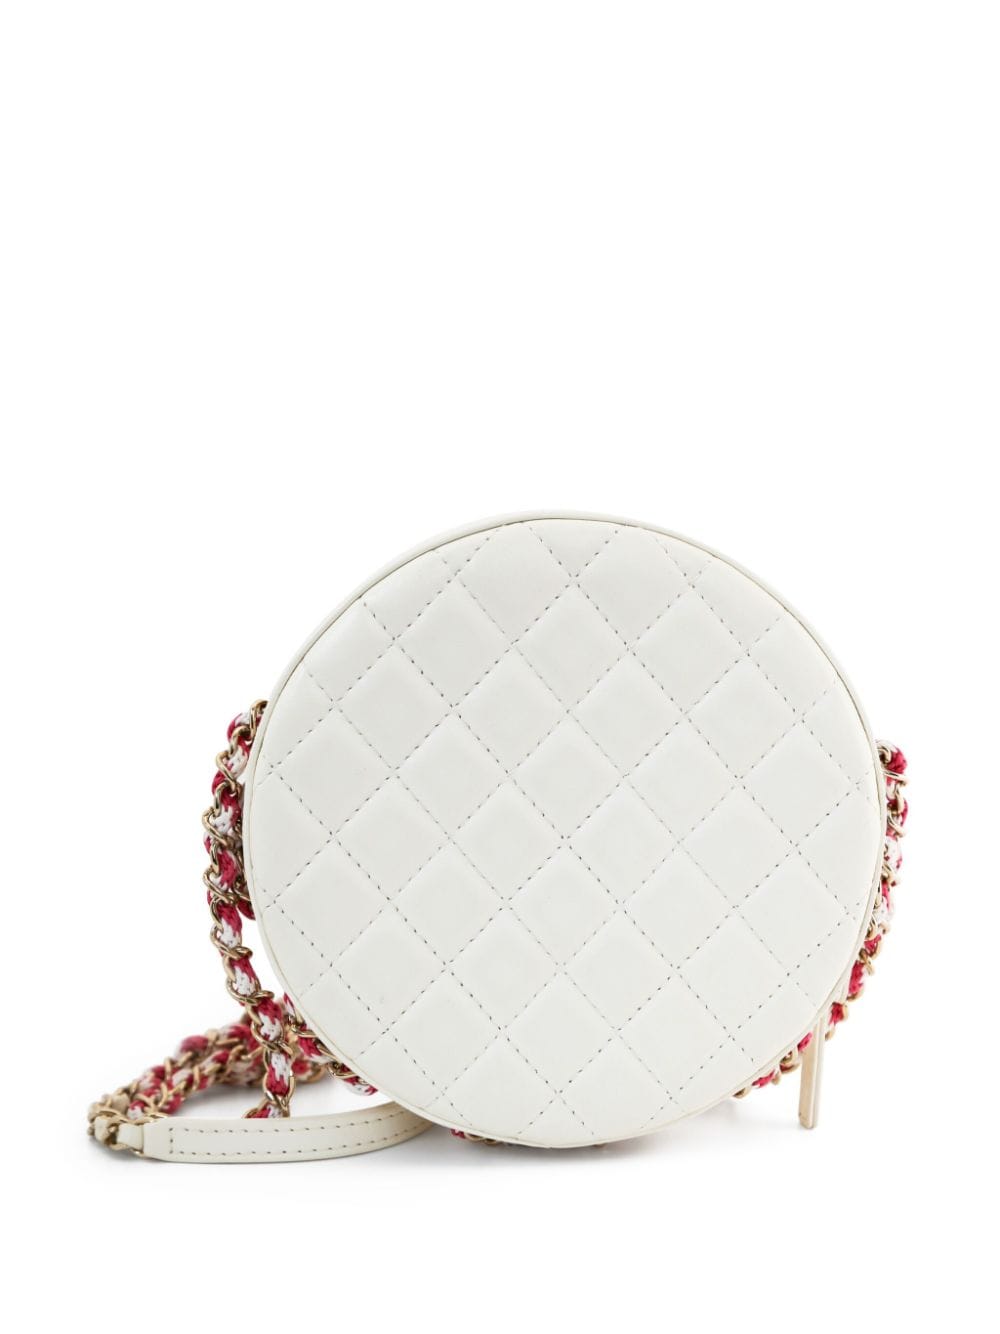 Pre-owned Chanel 2019 Cruise La Pausa Lifesaver Crossbody Bag In White